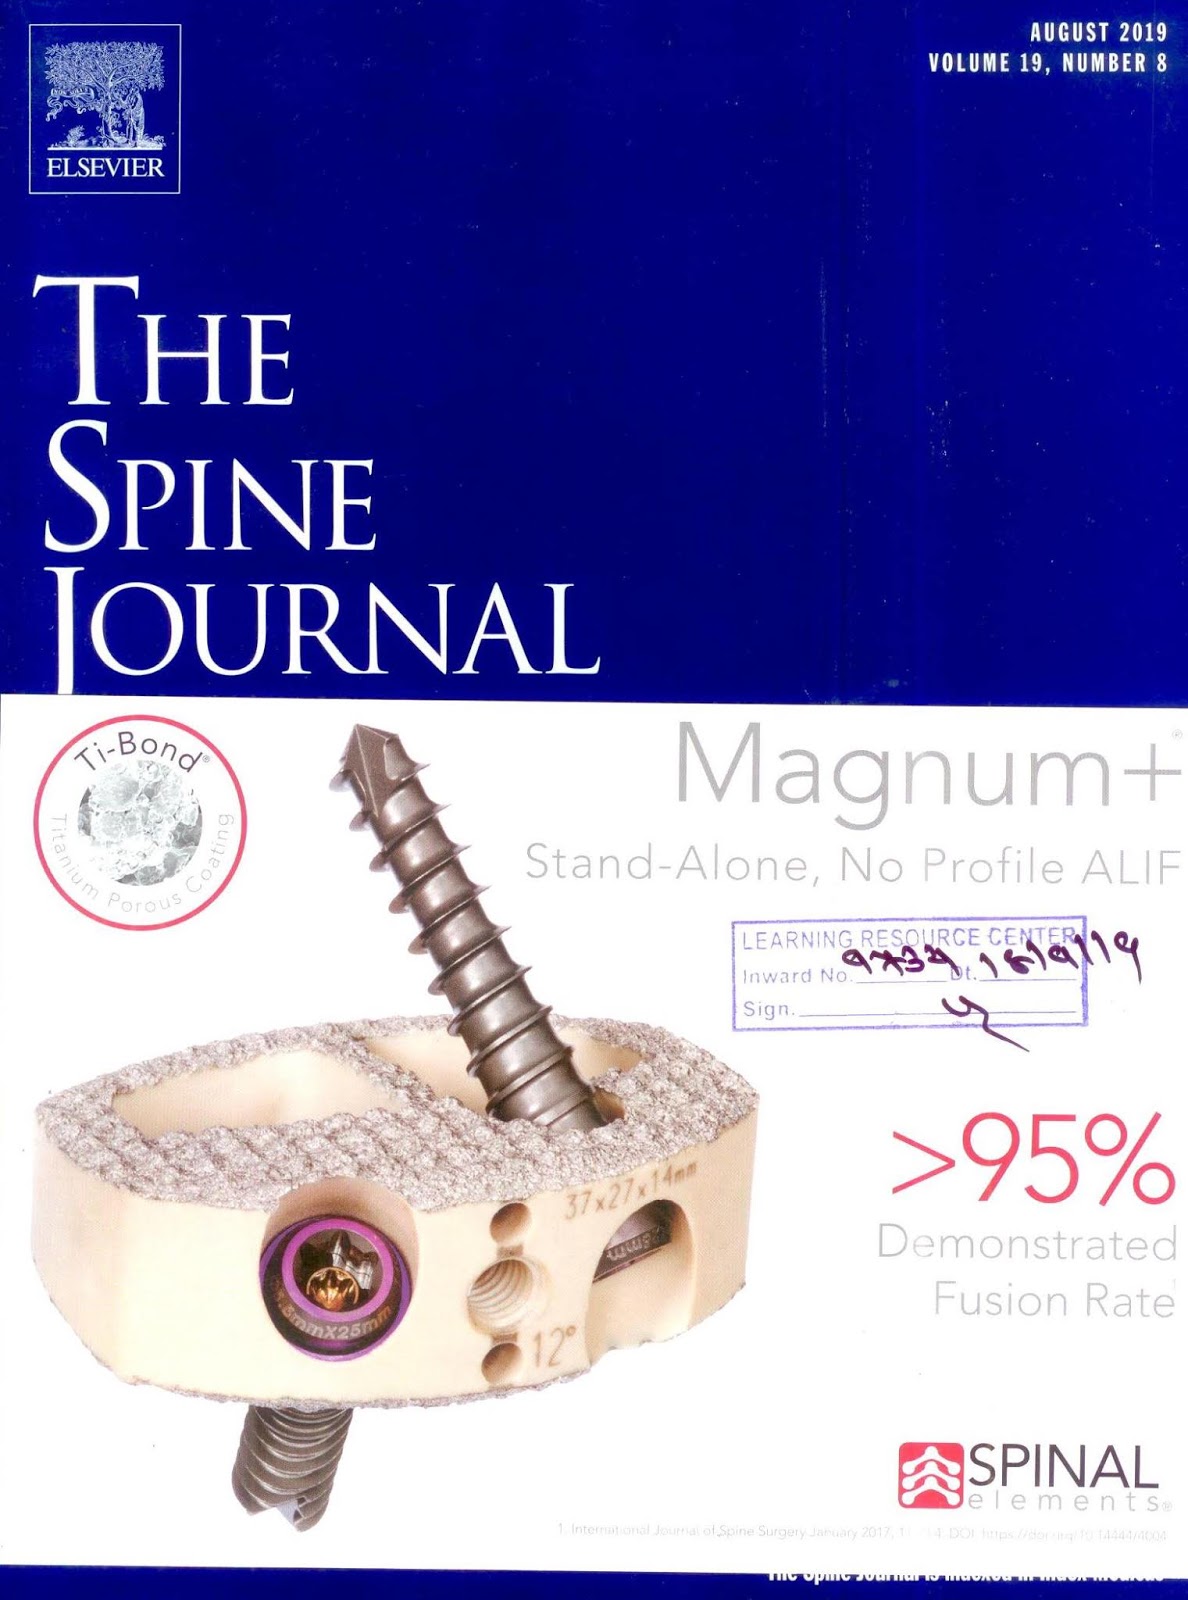 https://www.thespinejournalonline.com/issue/S1529-9430(19)X0007-8